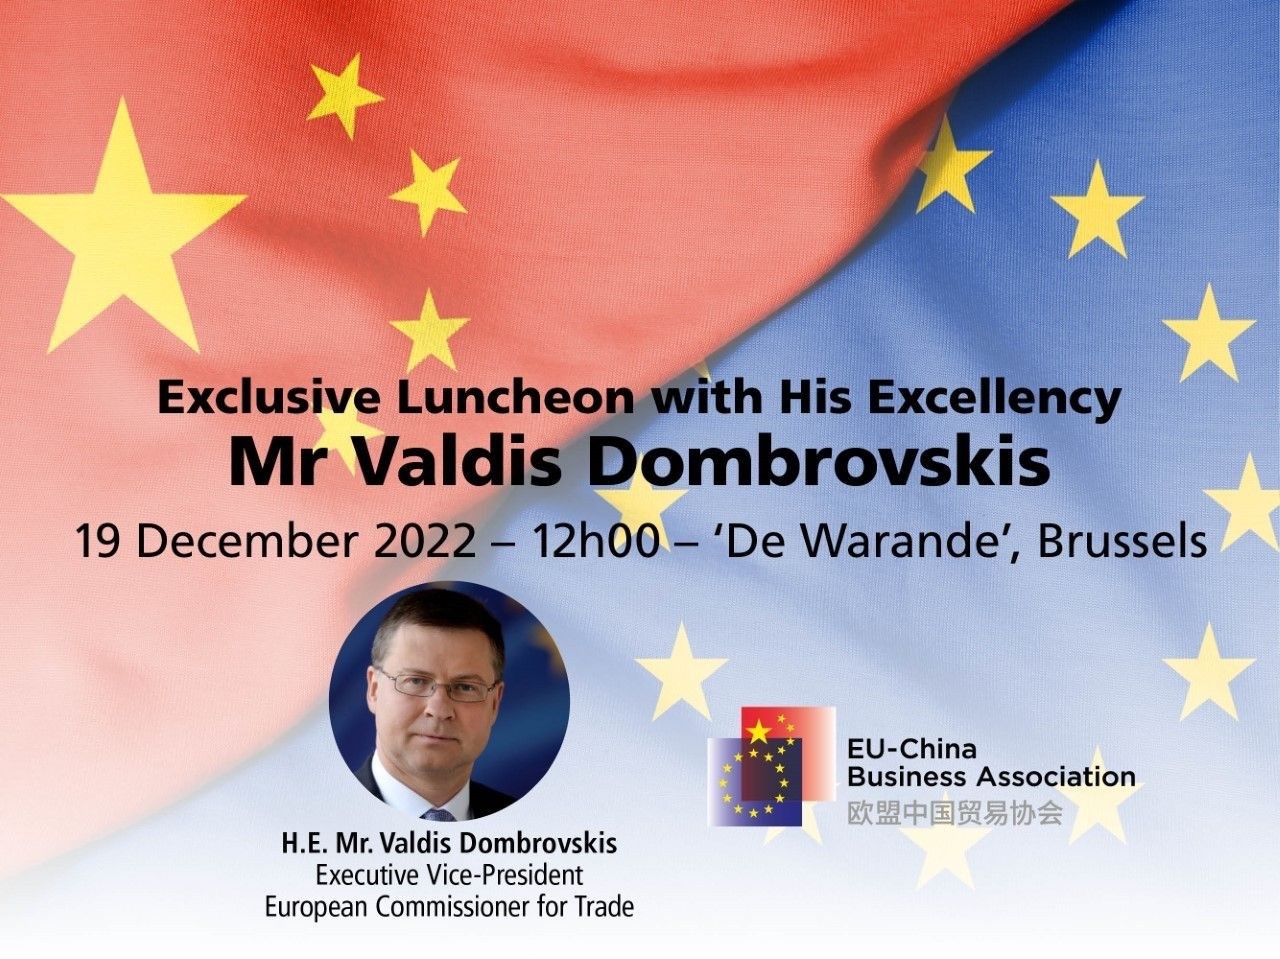 Exclusive luncheon with His Excellency Mr Valdis Dombrovskis, Executive Vice-President and European Commissioner for Trade - 19 December 2022 – 12h00 – 'De Warande', Brussels